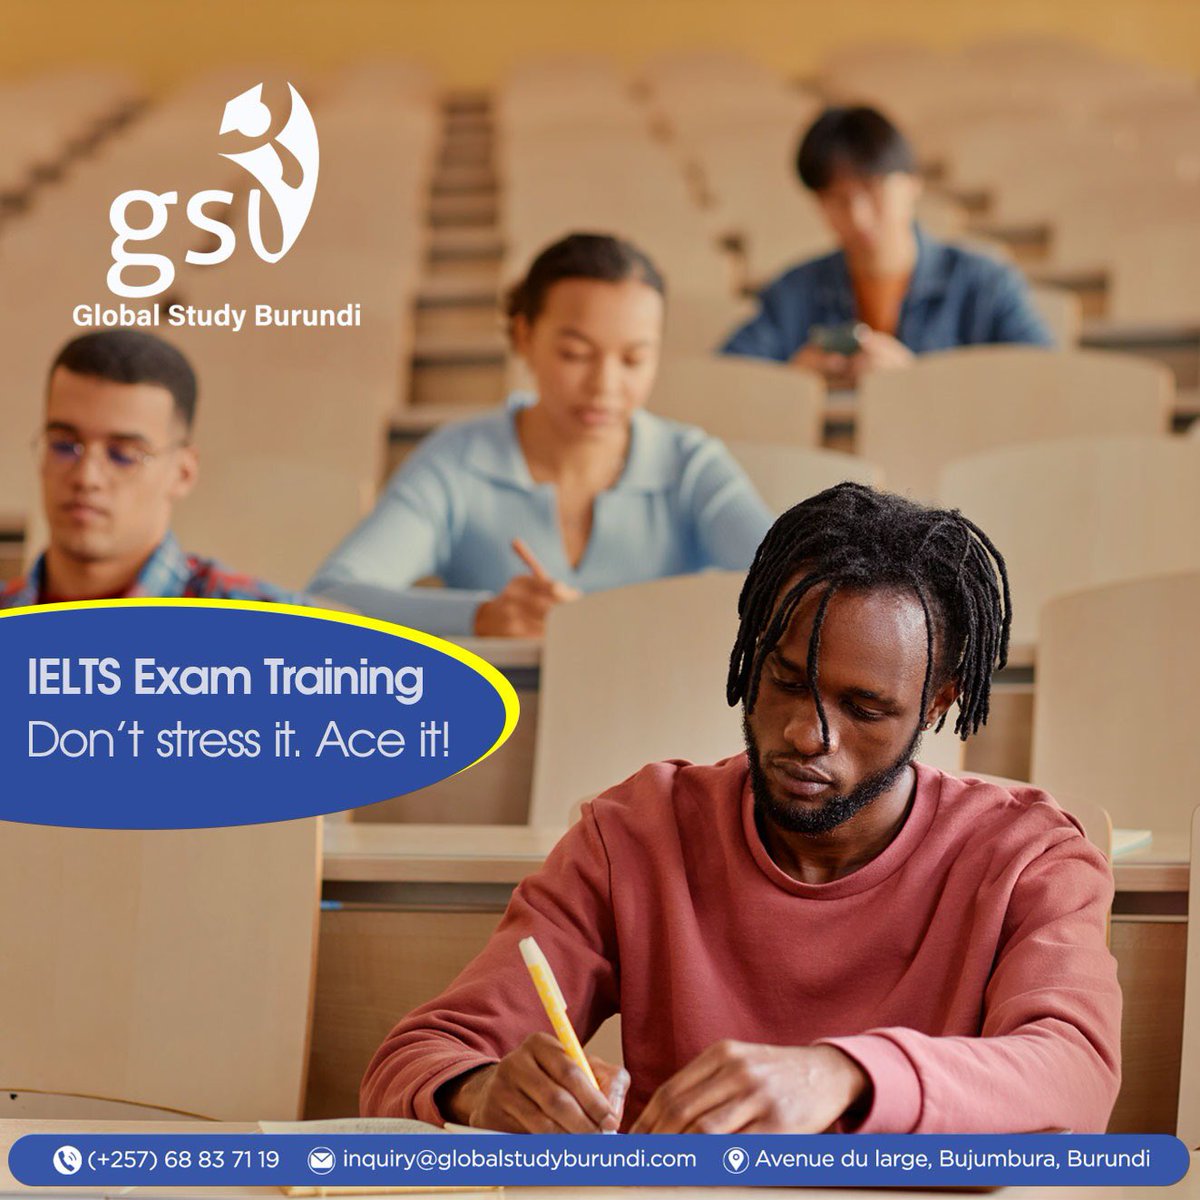 Ace your IELTS Exams thanks to our IELTS Exam Training.

Contact us for free support via +257 68 83 71 19.

#GSU #IELTSTraining #EnglishExams #MondayMotivation